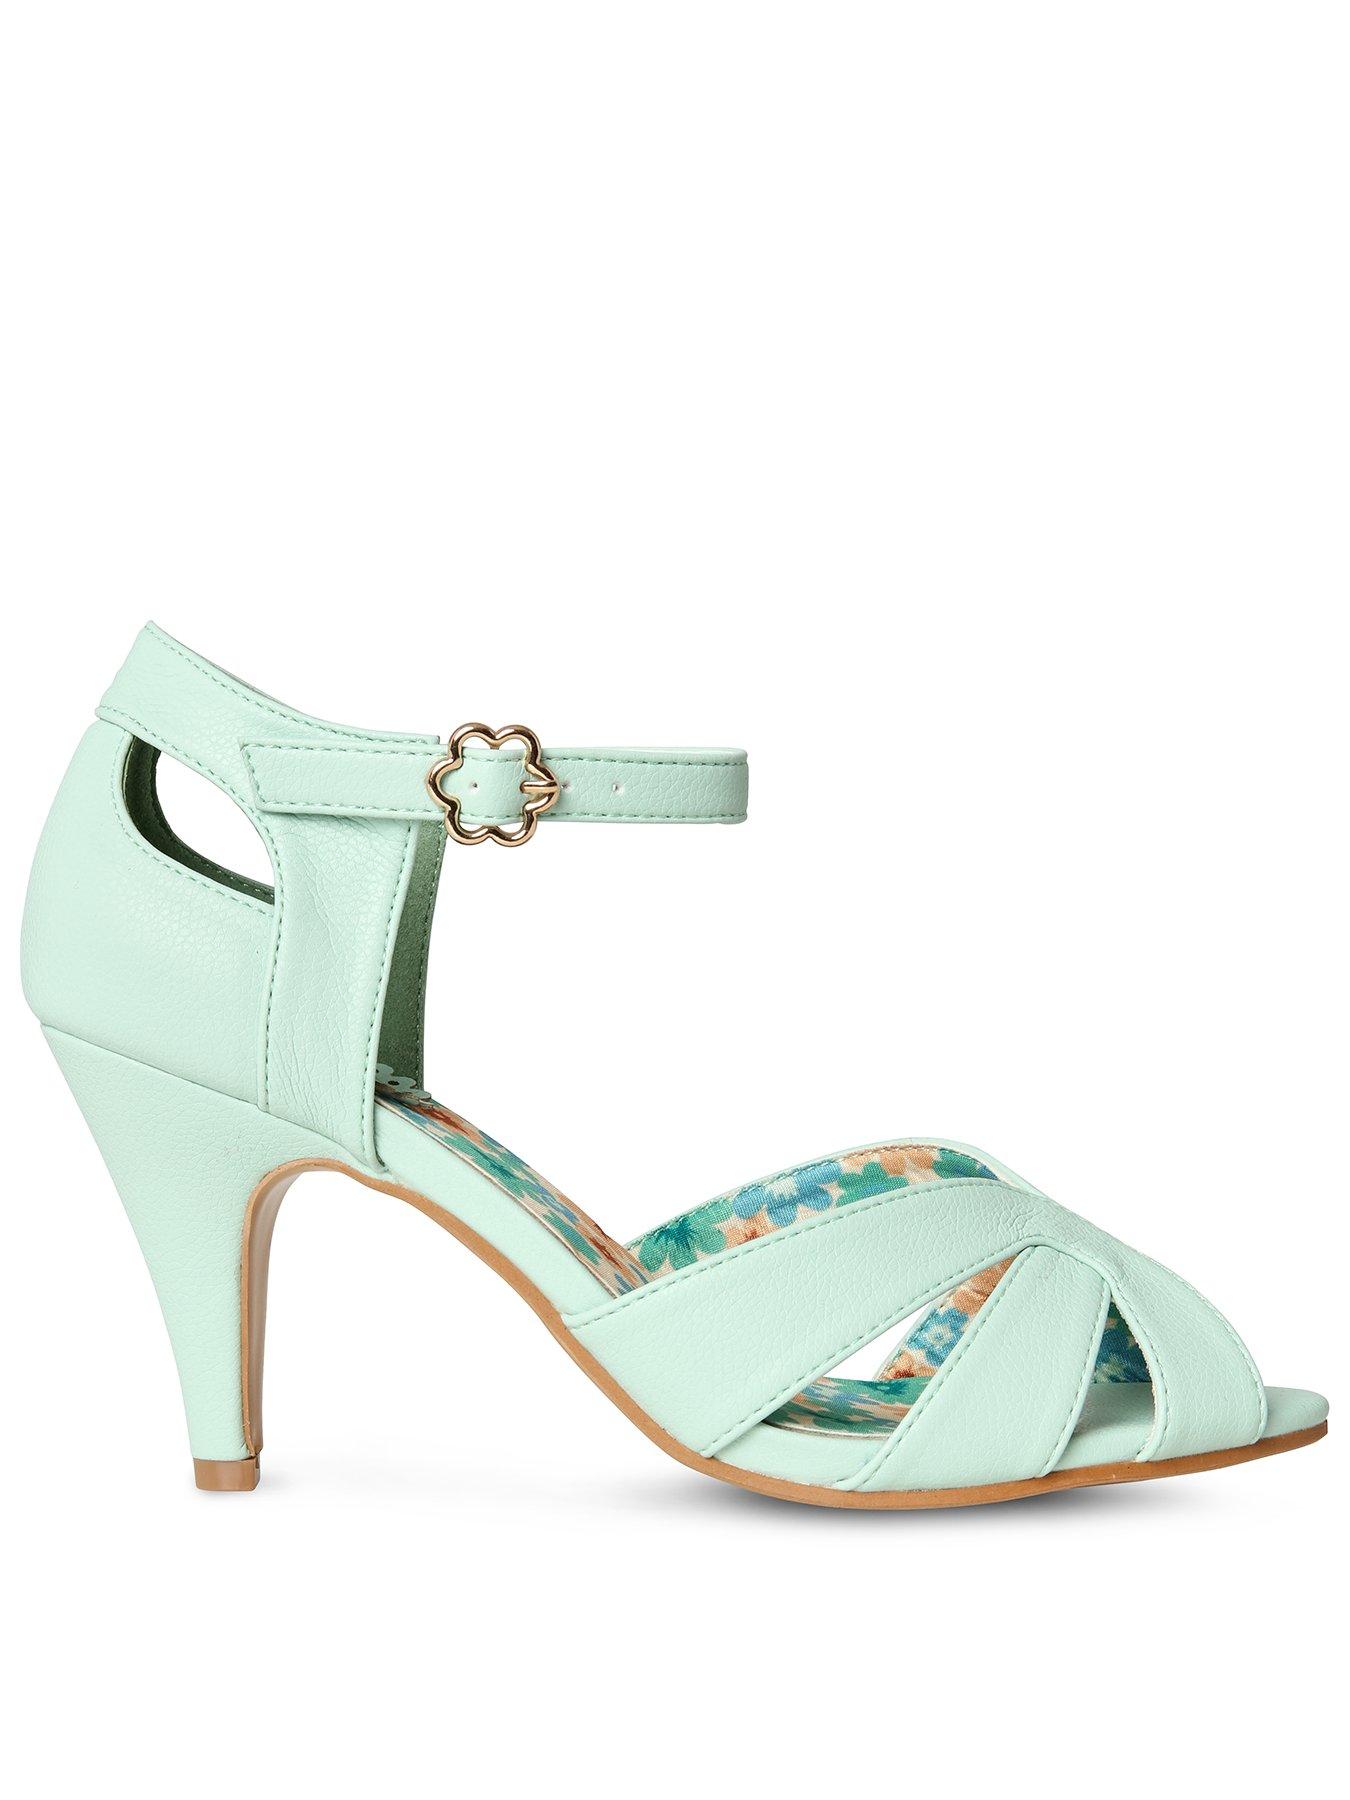  Sweet Polly Heeled Sandals - Sage